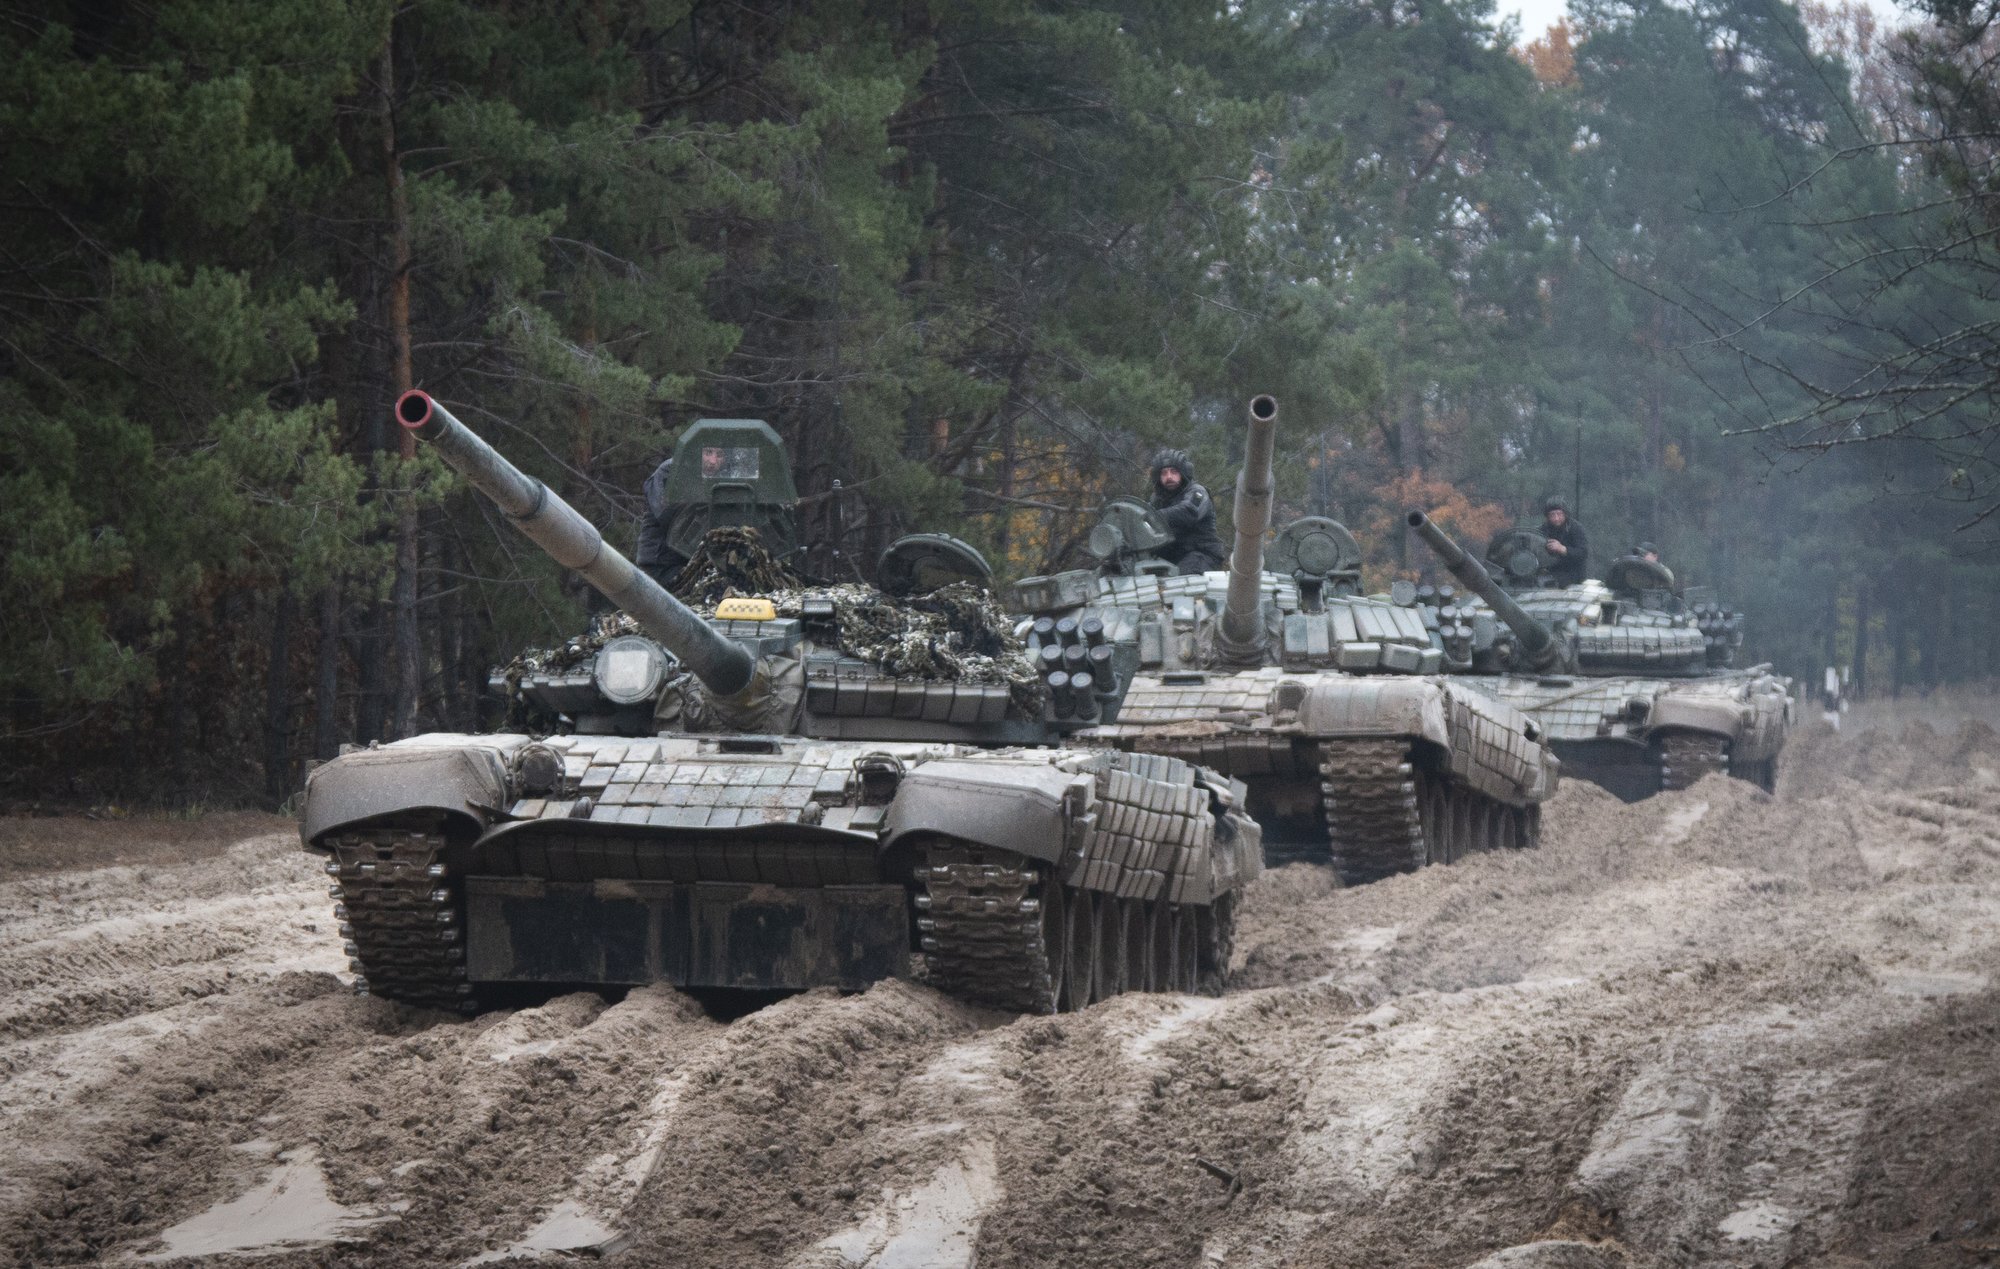 FILE - Ukrainian soldiers on captured Russian tanks T-72 hold military training close to the Ukraine-Belarus border near Chernihiv, Ukraine, Friday, Oct. 28, 2022. The West's move to send tanks to Ukraine was greeted enthusiastically from Kyiv, Berlin and Washington. But Moscow seemed to shrug. The Kremlin has warned the West that supplying tanks would be a dangerous escalation of the conflict and denounced the decision. AP photo by Aleksandr Shulman, File.